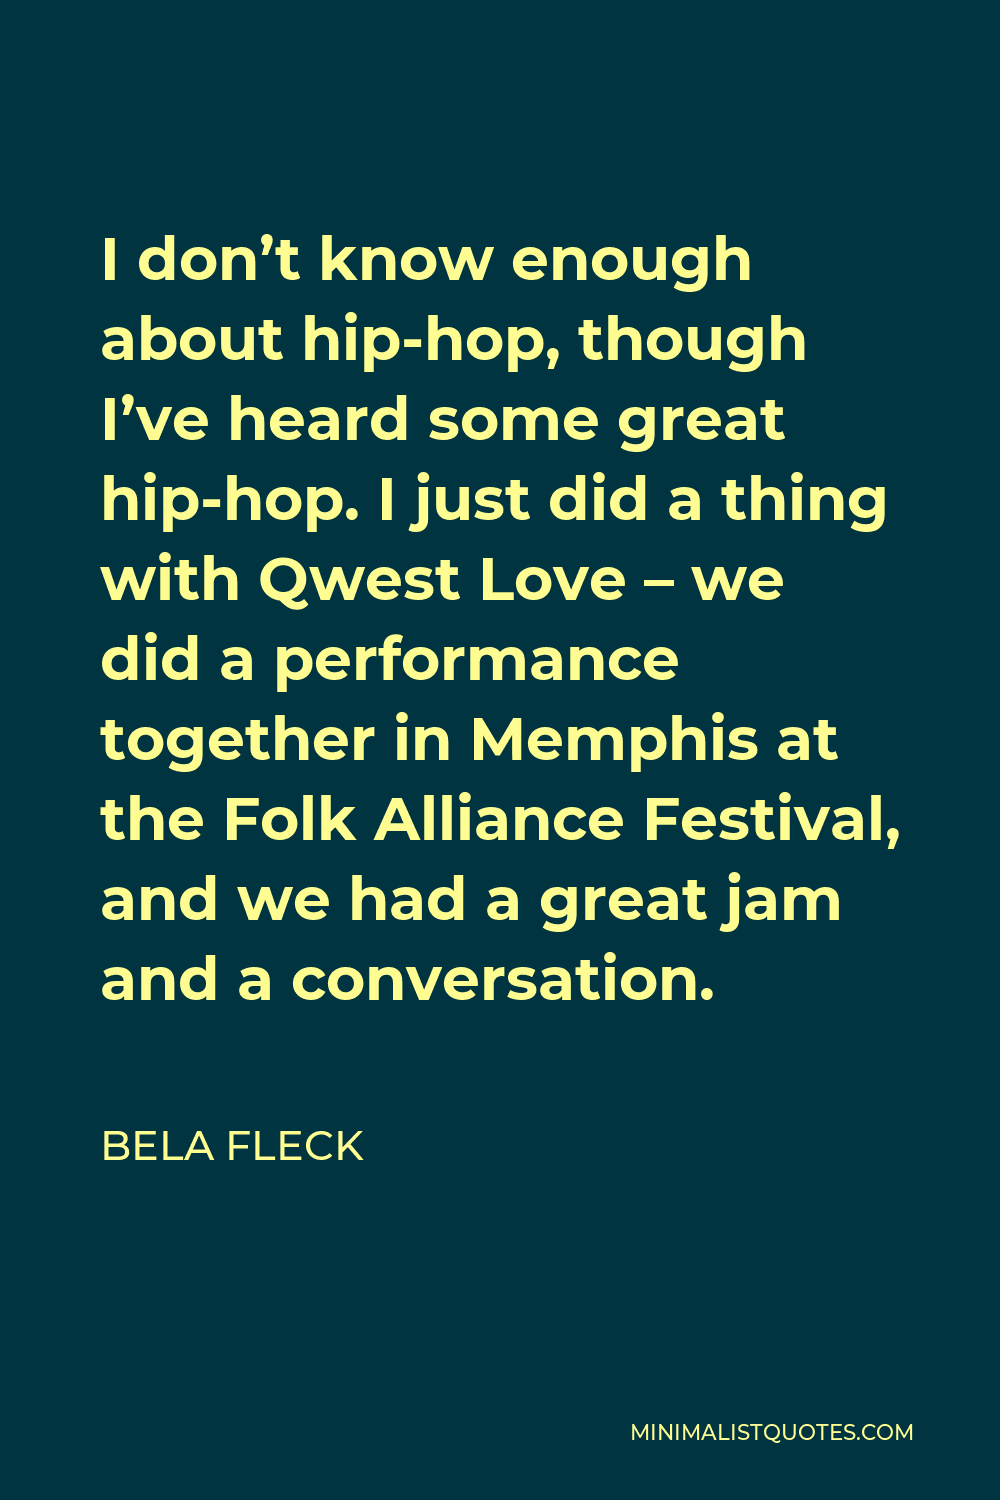 Bela Fleck Quote - I don’t know enough about hip-hop, though I’ve heard some great hip-hop. I just did a thing with Qwest Love – we did a performance together in Memphis at the Folk Alliance Festival, and we had a great jam and a conversation.